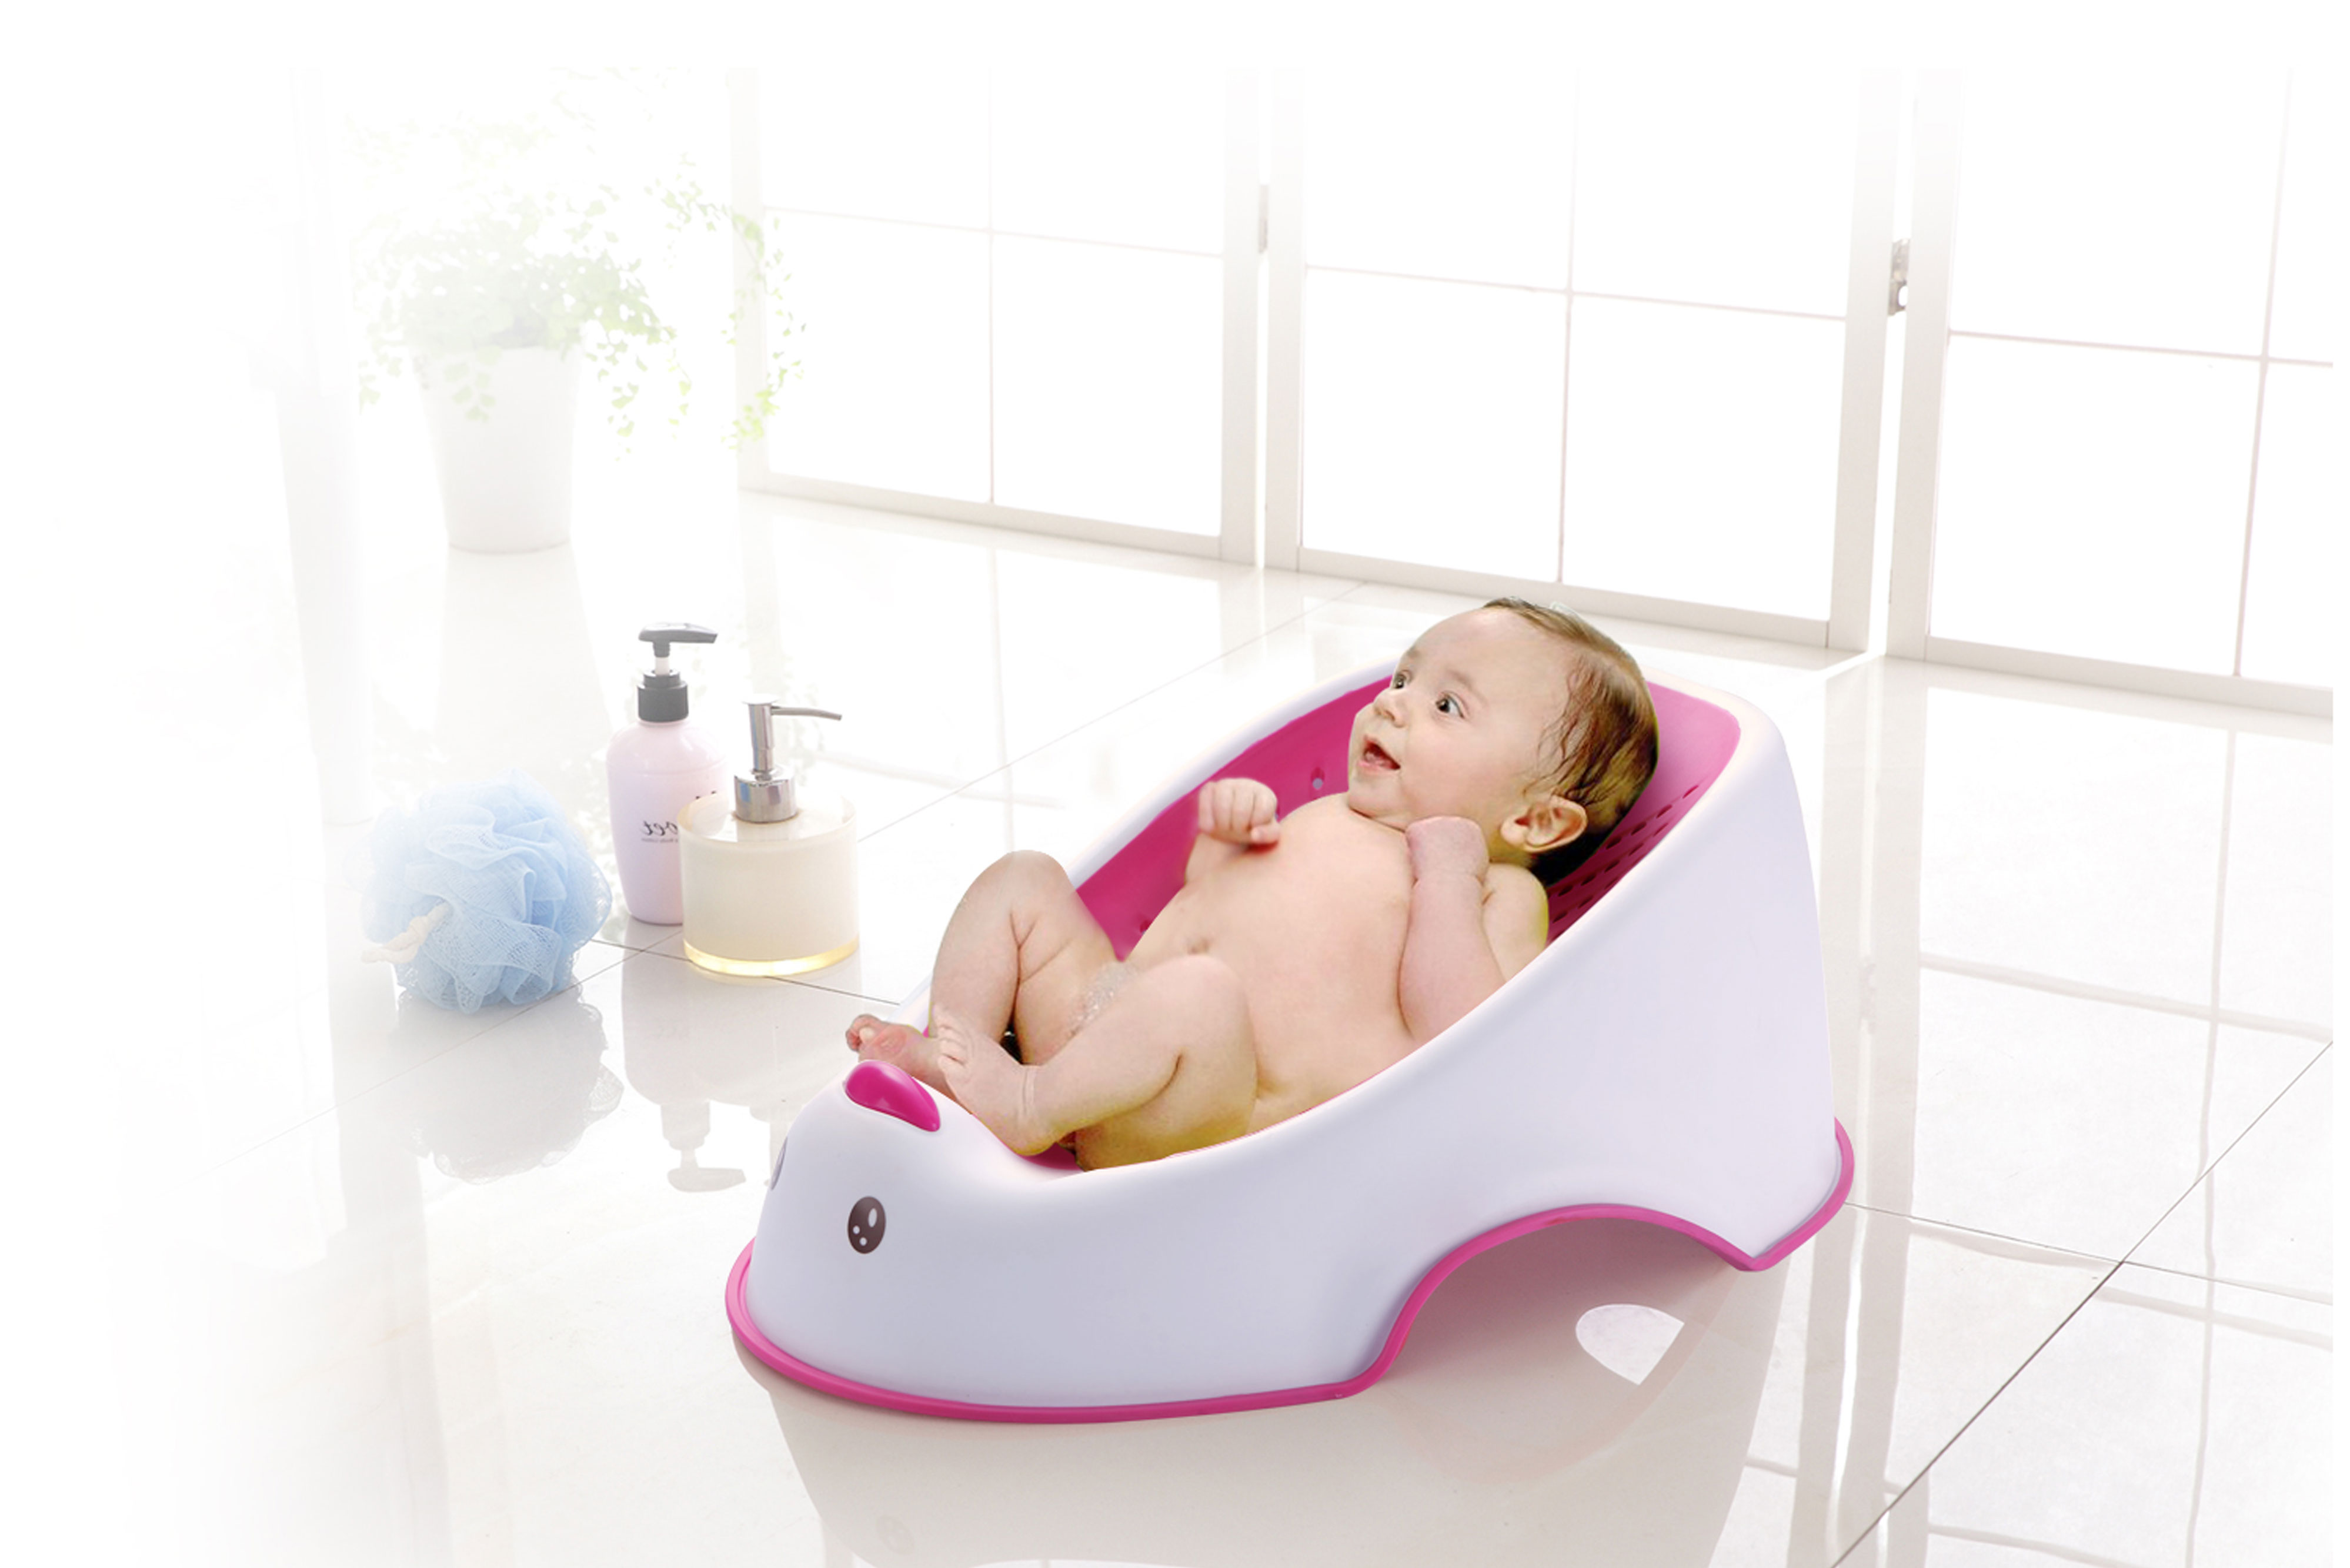 Advantages of Babyhood's Bath Support